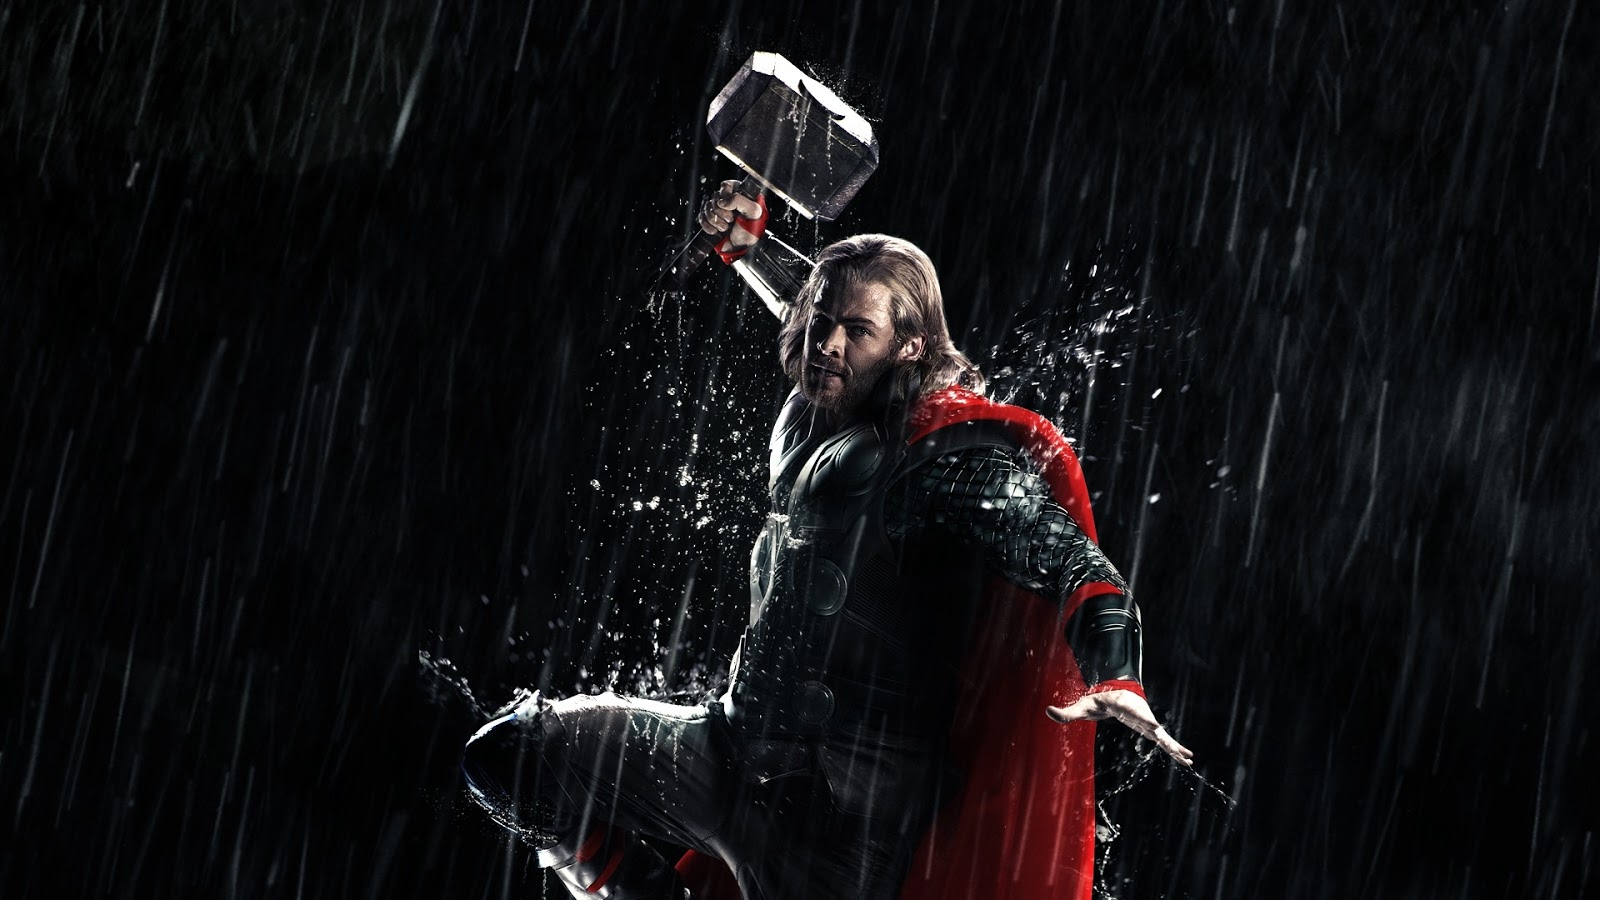 Thor 2: The Dark World Full HD Movie Free Download or Watch The full